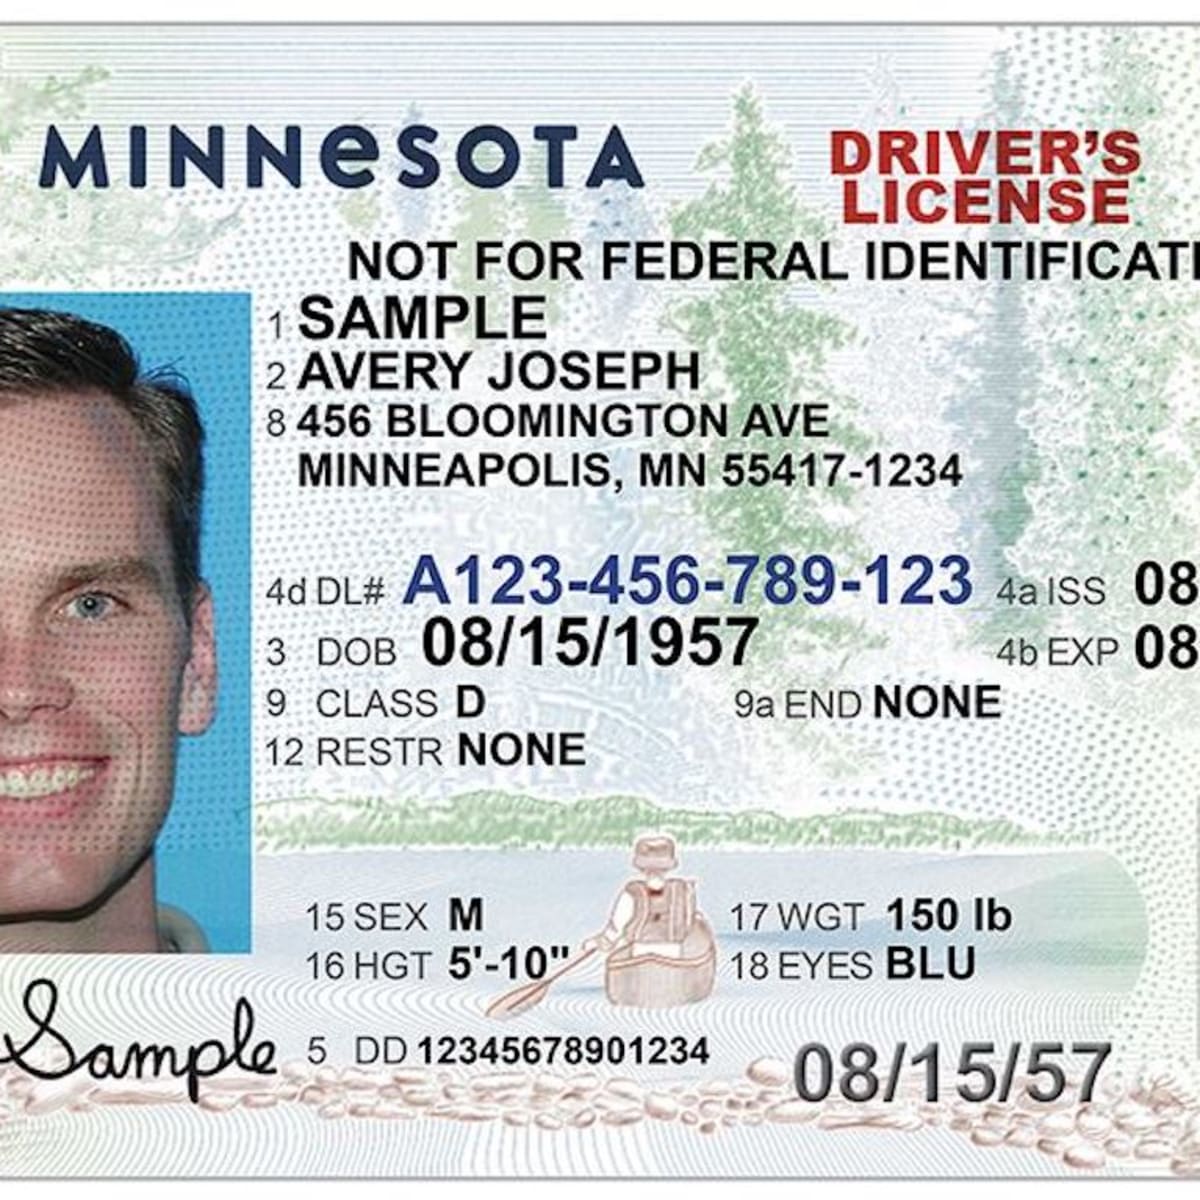 Minnesota's New “Driver's Licenses for All” Law Takes Effect